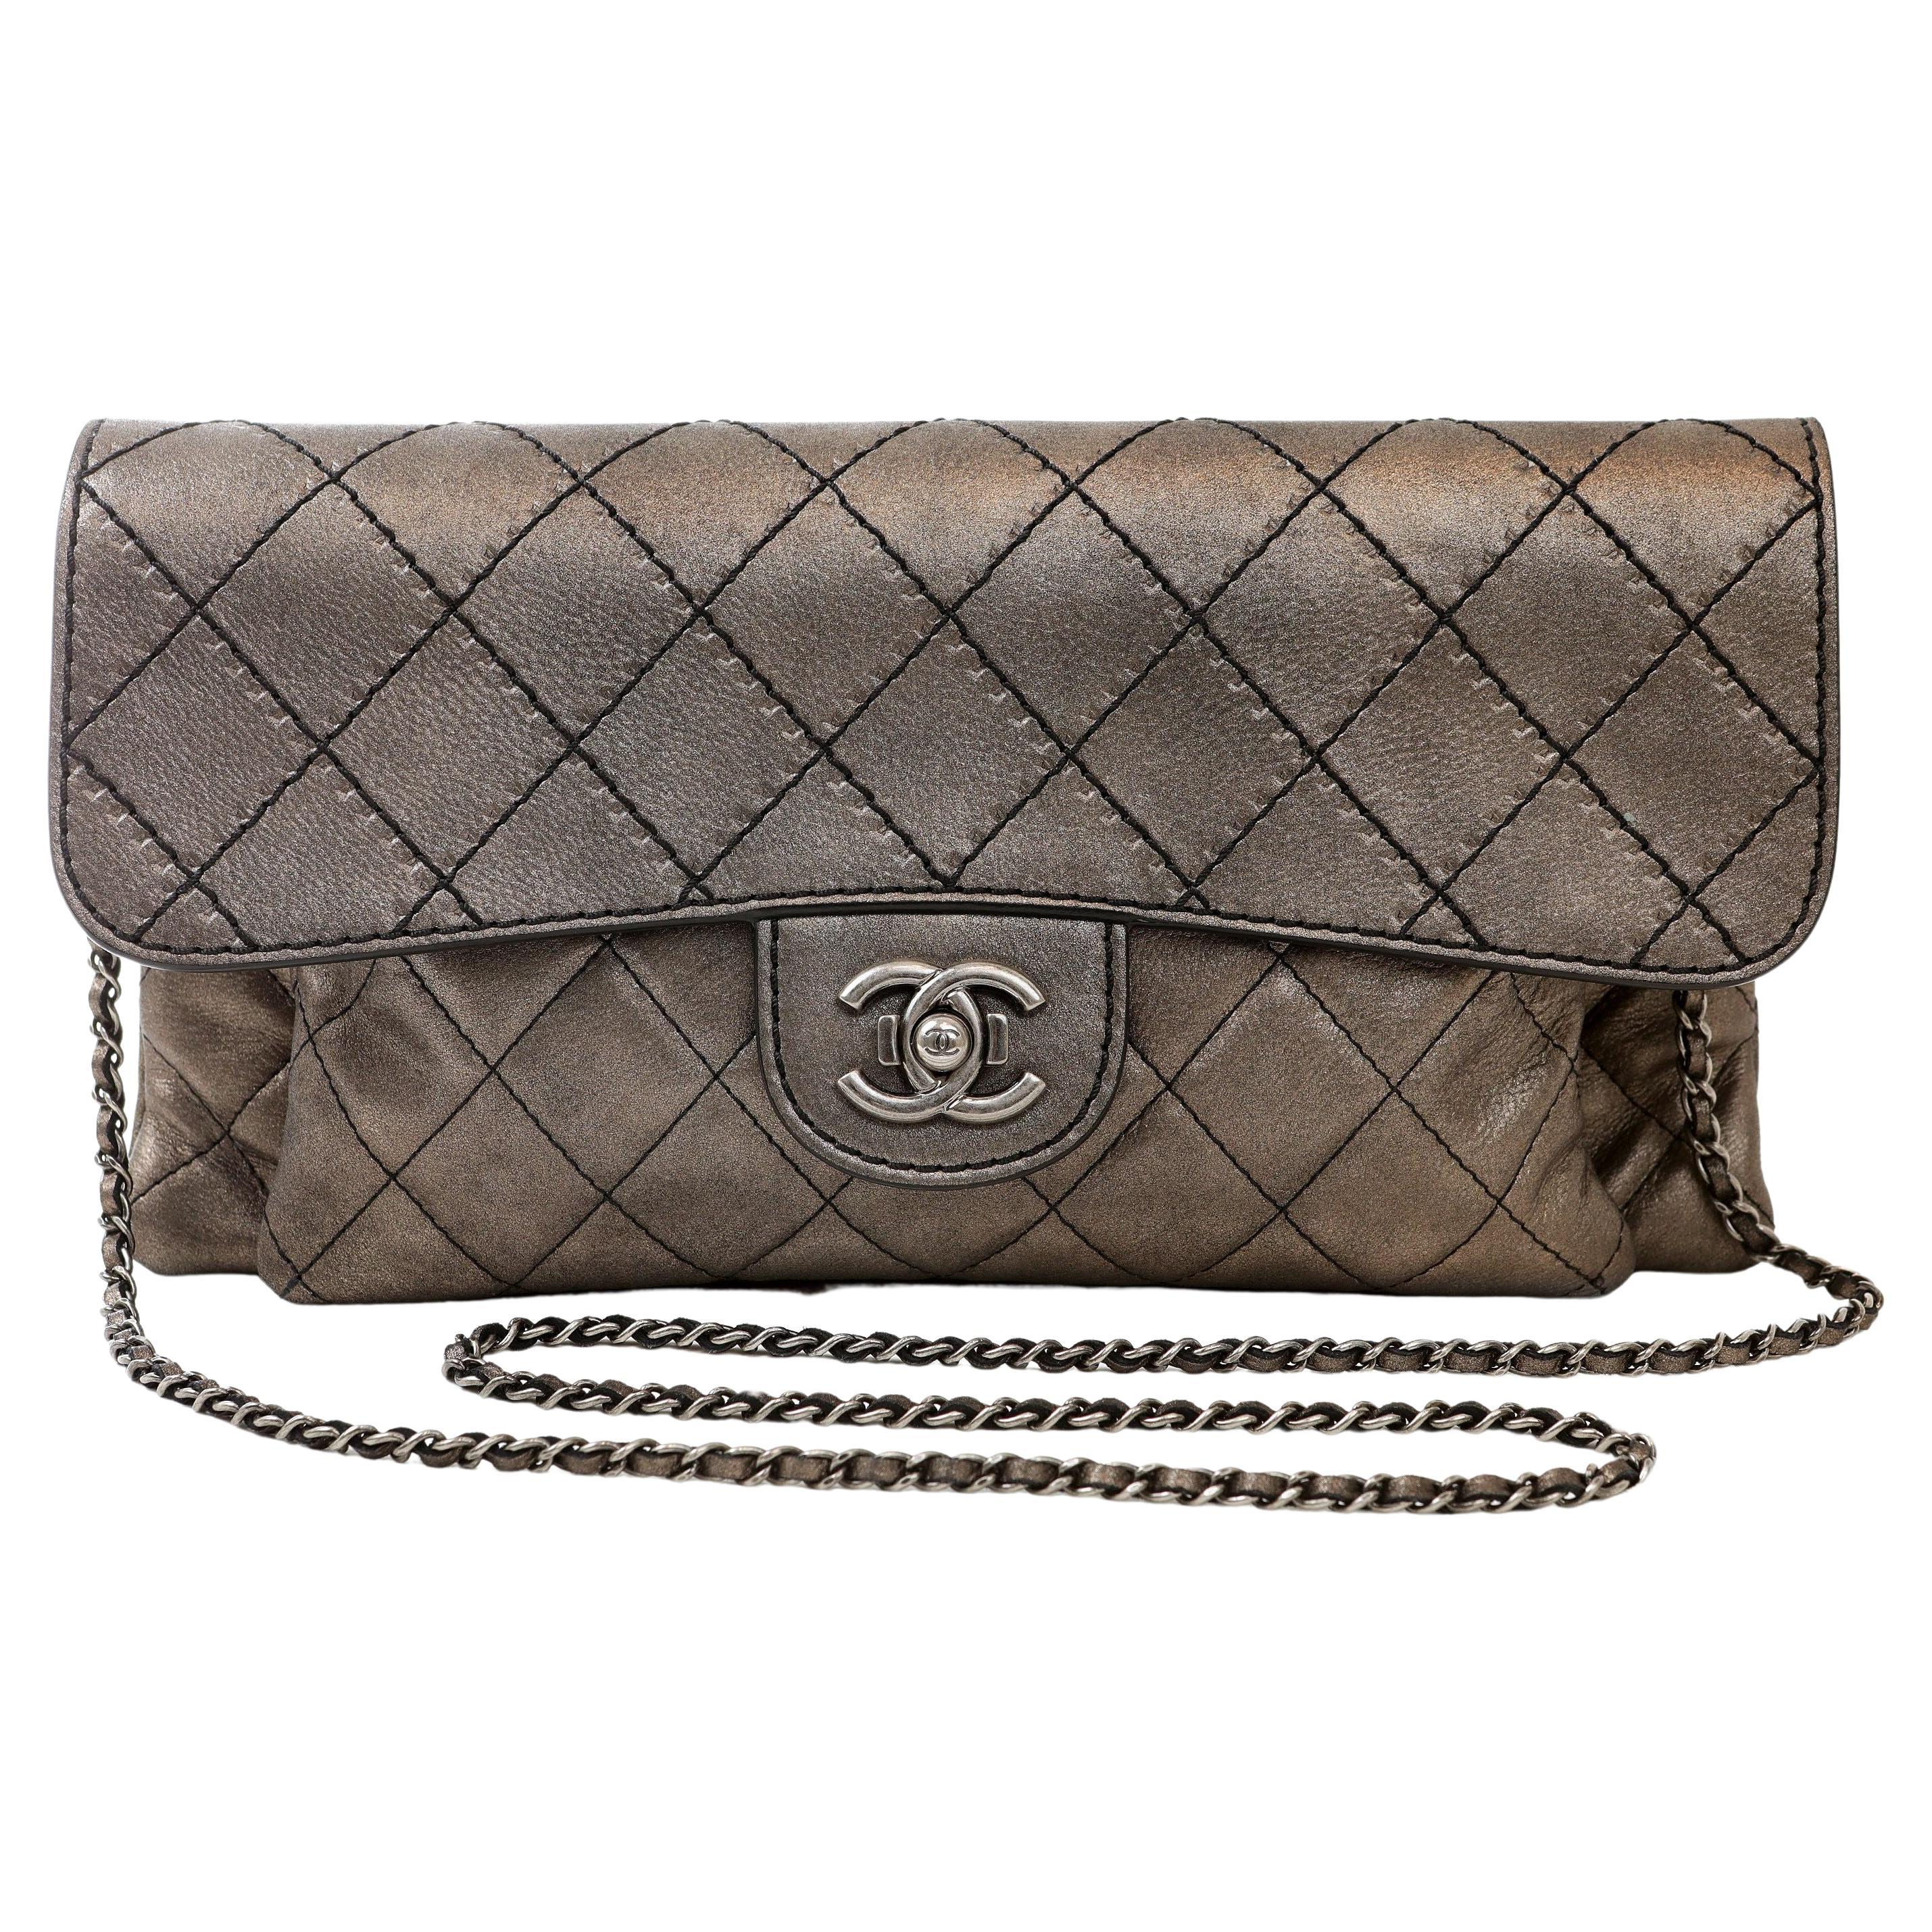 Chanel Metallic Copper Lambskin Small Crossbody Flap Bag with Ruthenium Hardware For Sale